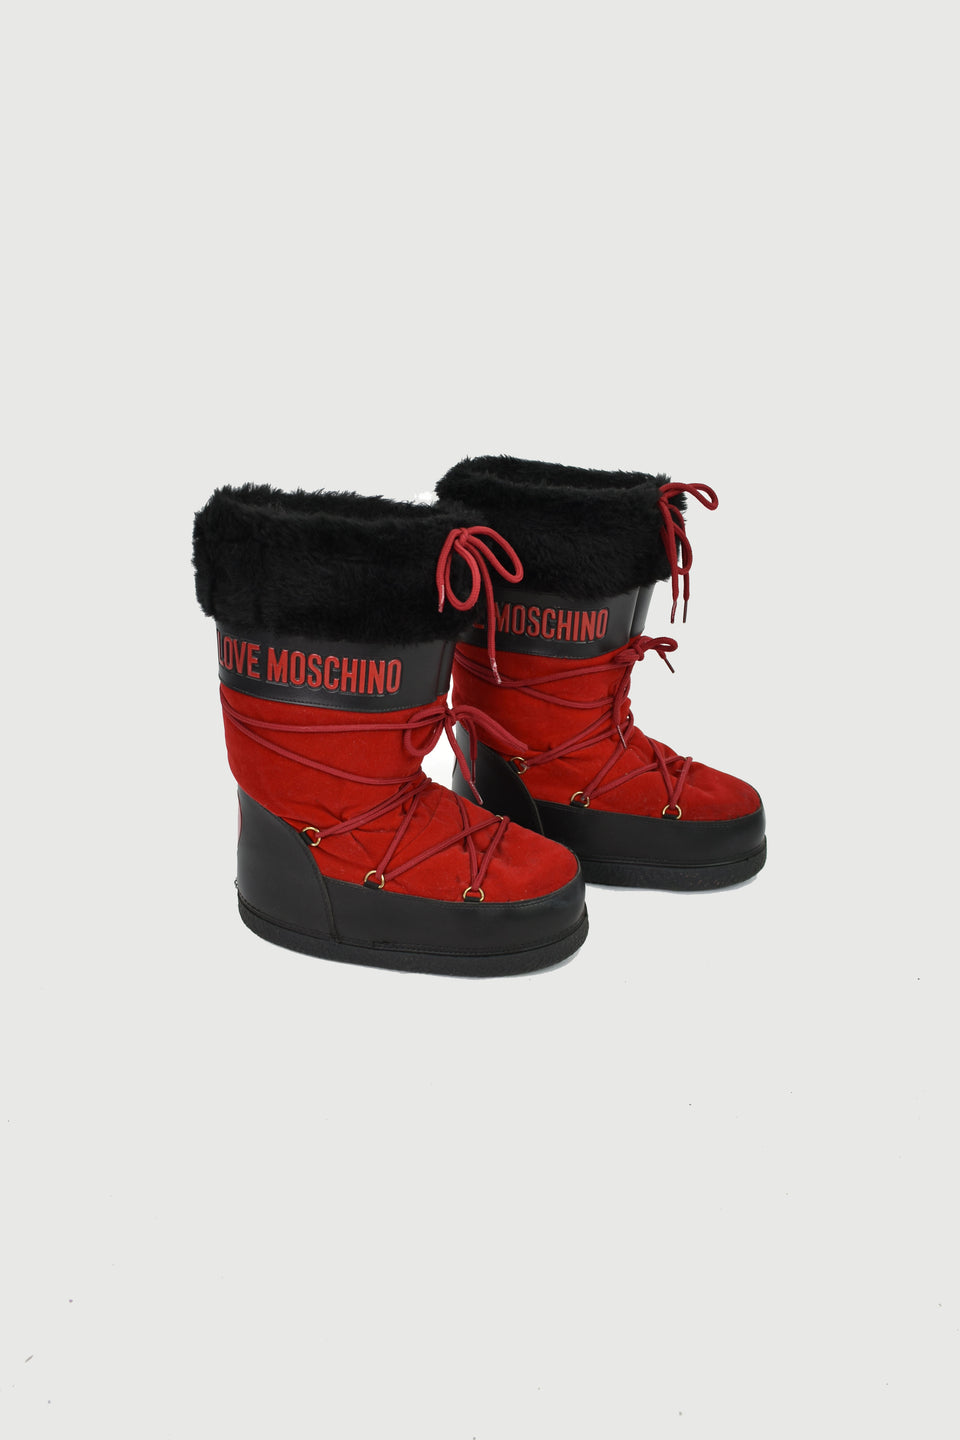 MOSCHINO Moon Boots